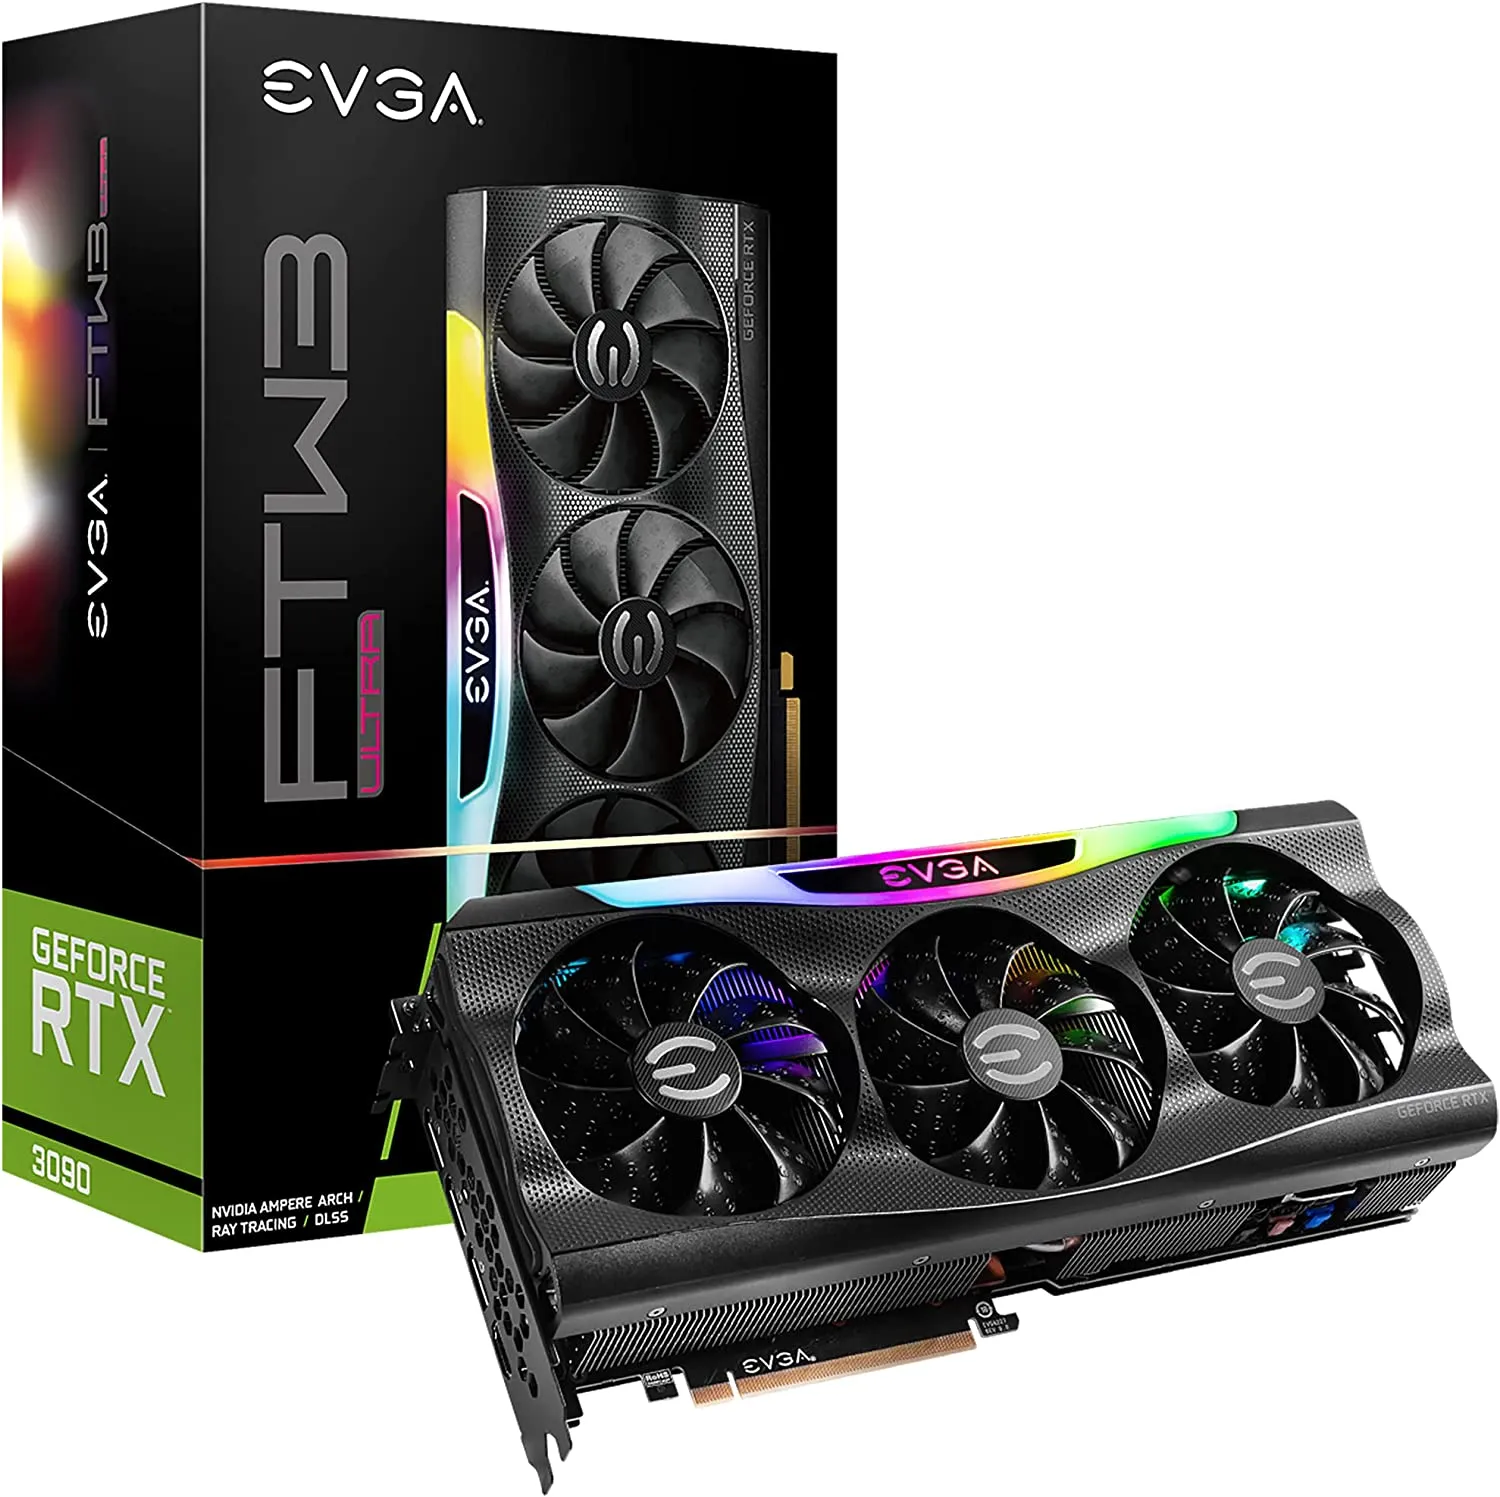 EVGA GeForce RTX 3090 Best Graphics Card for Mining